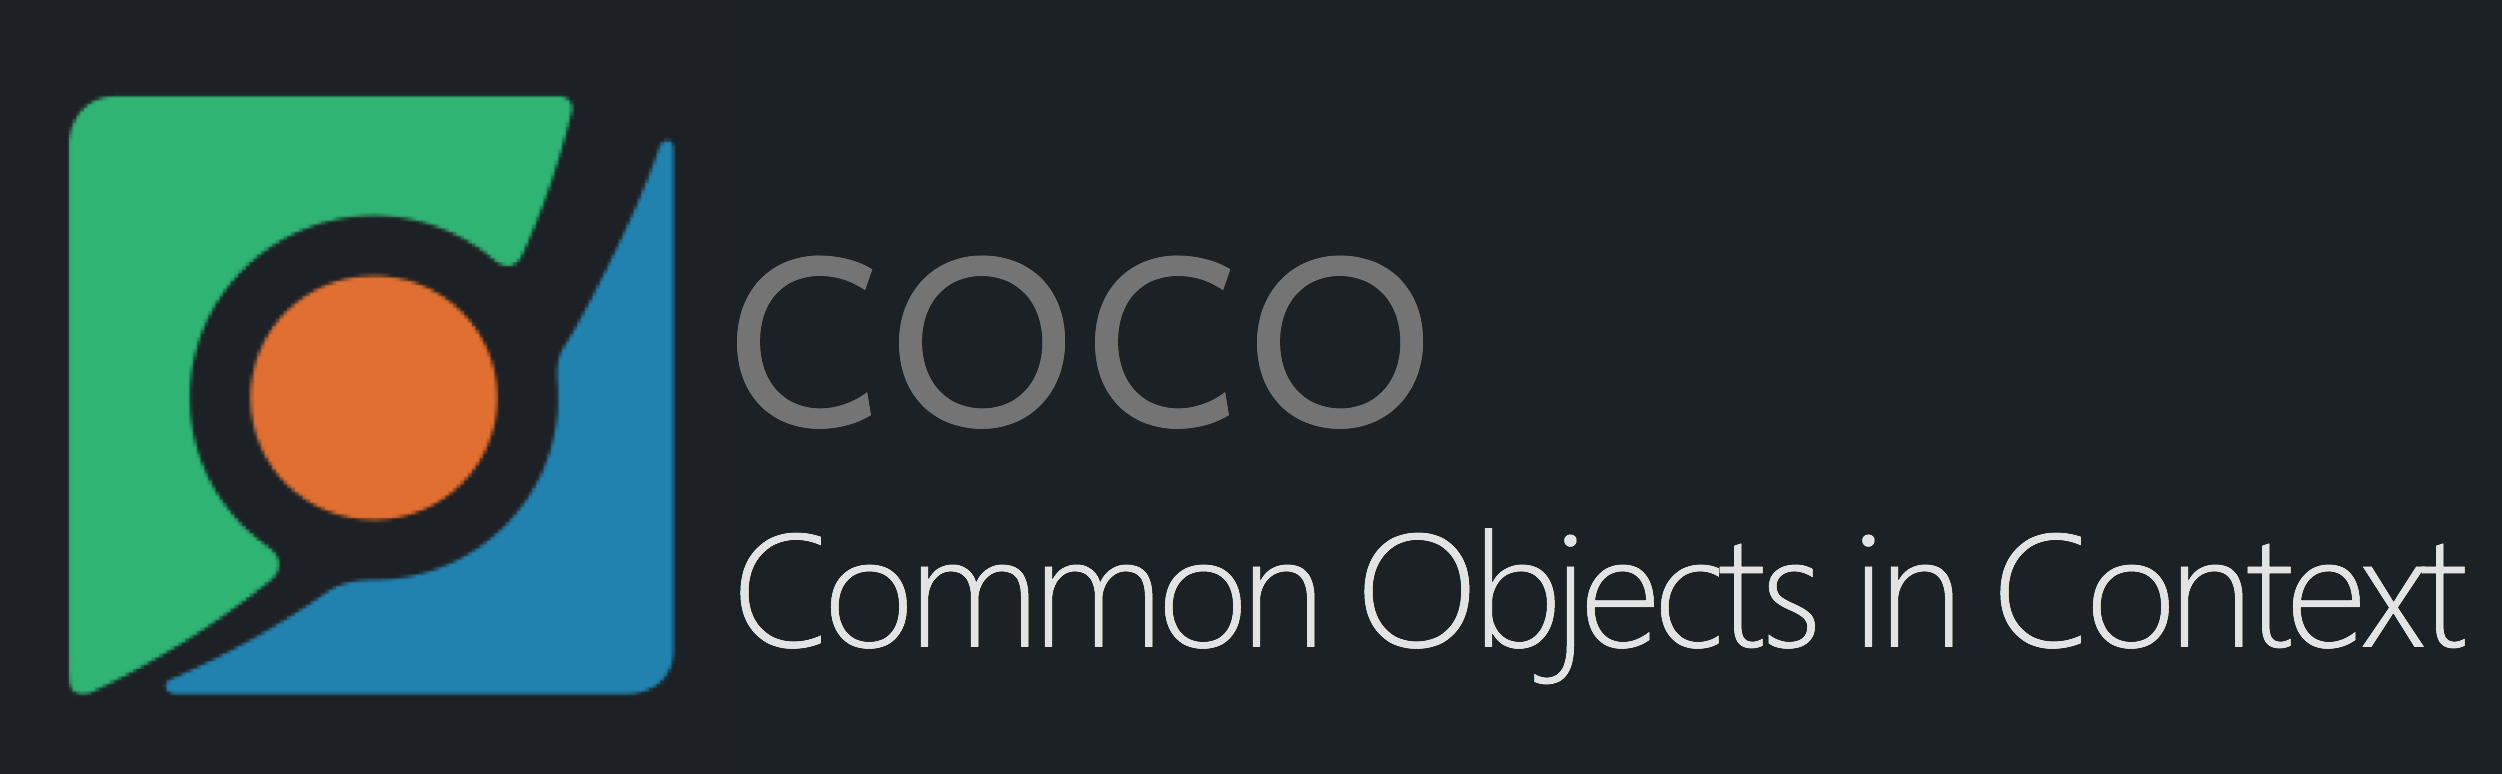 http://cocodataset.org/images/coco-logo.png